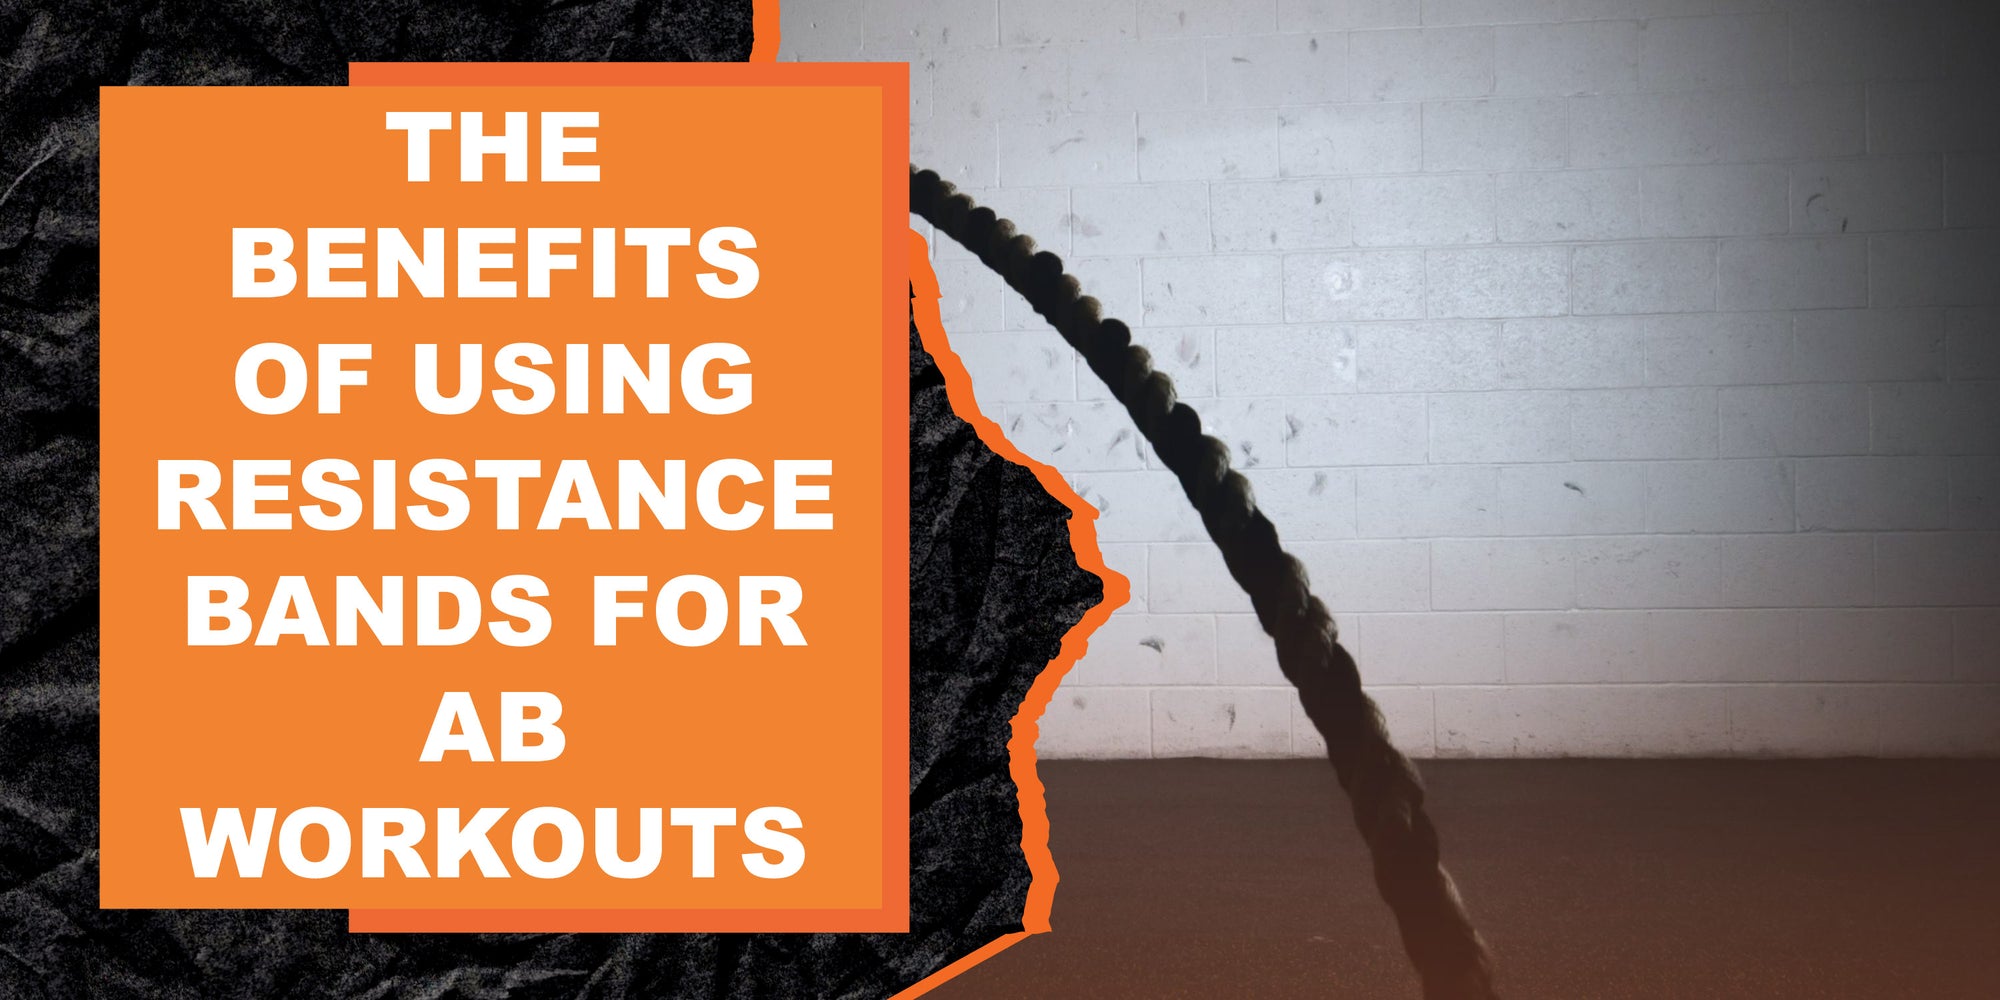 The Benefits of Using Resistance Bands for Ab Workouts